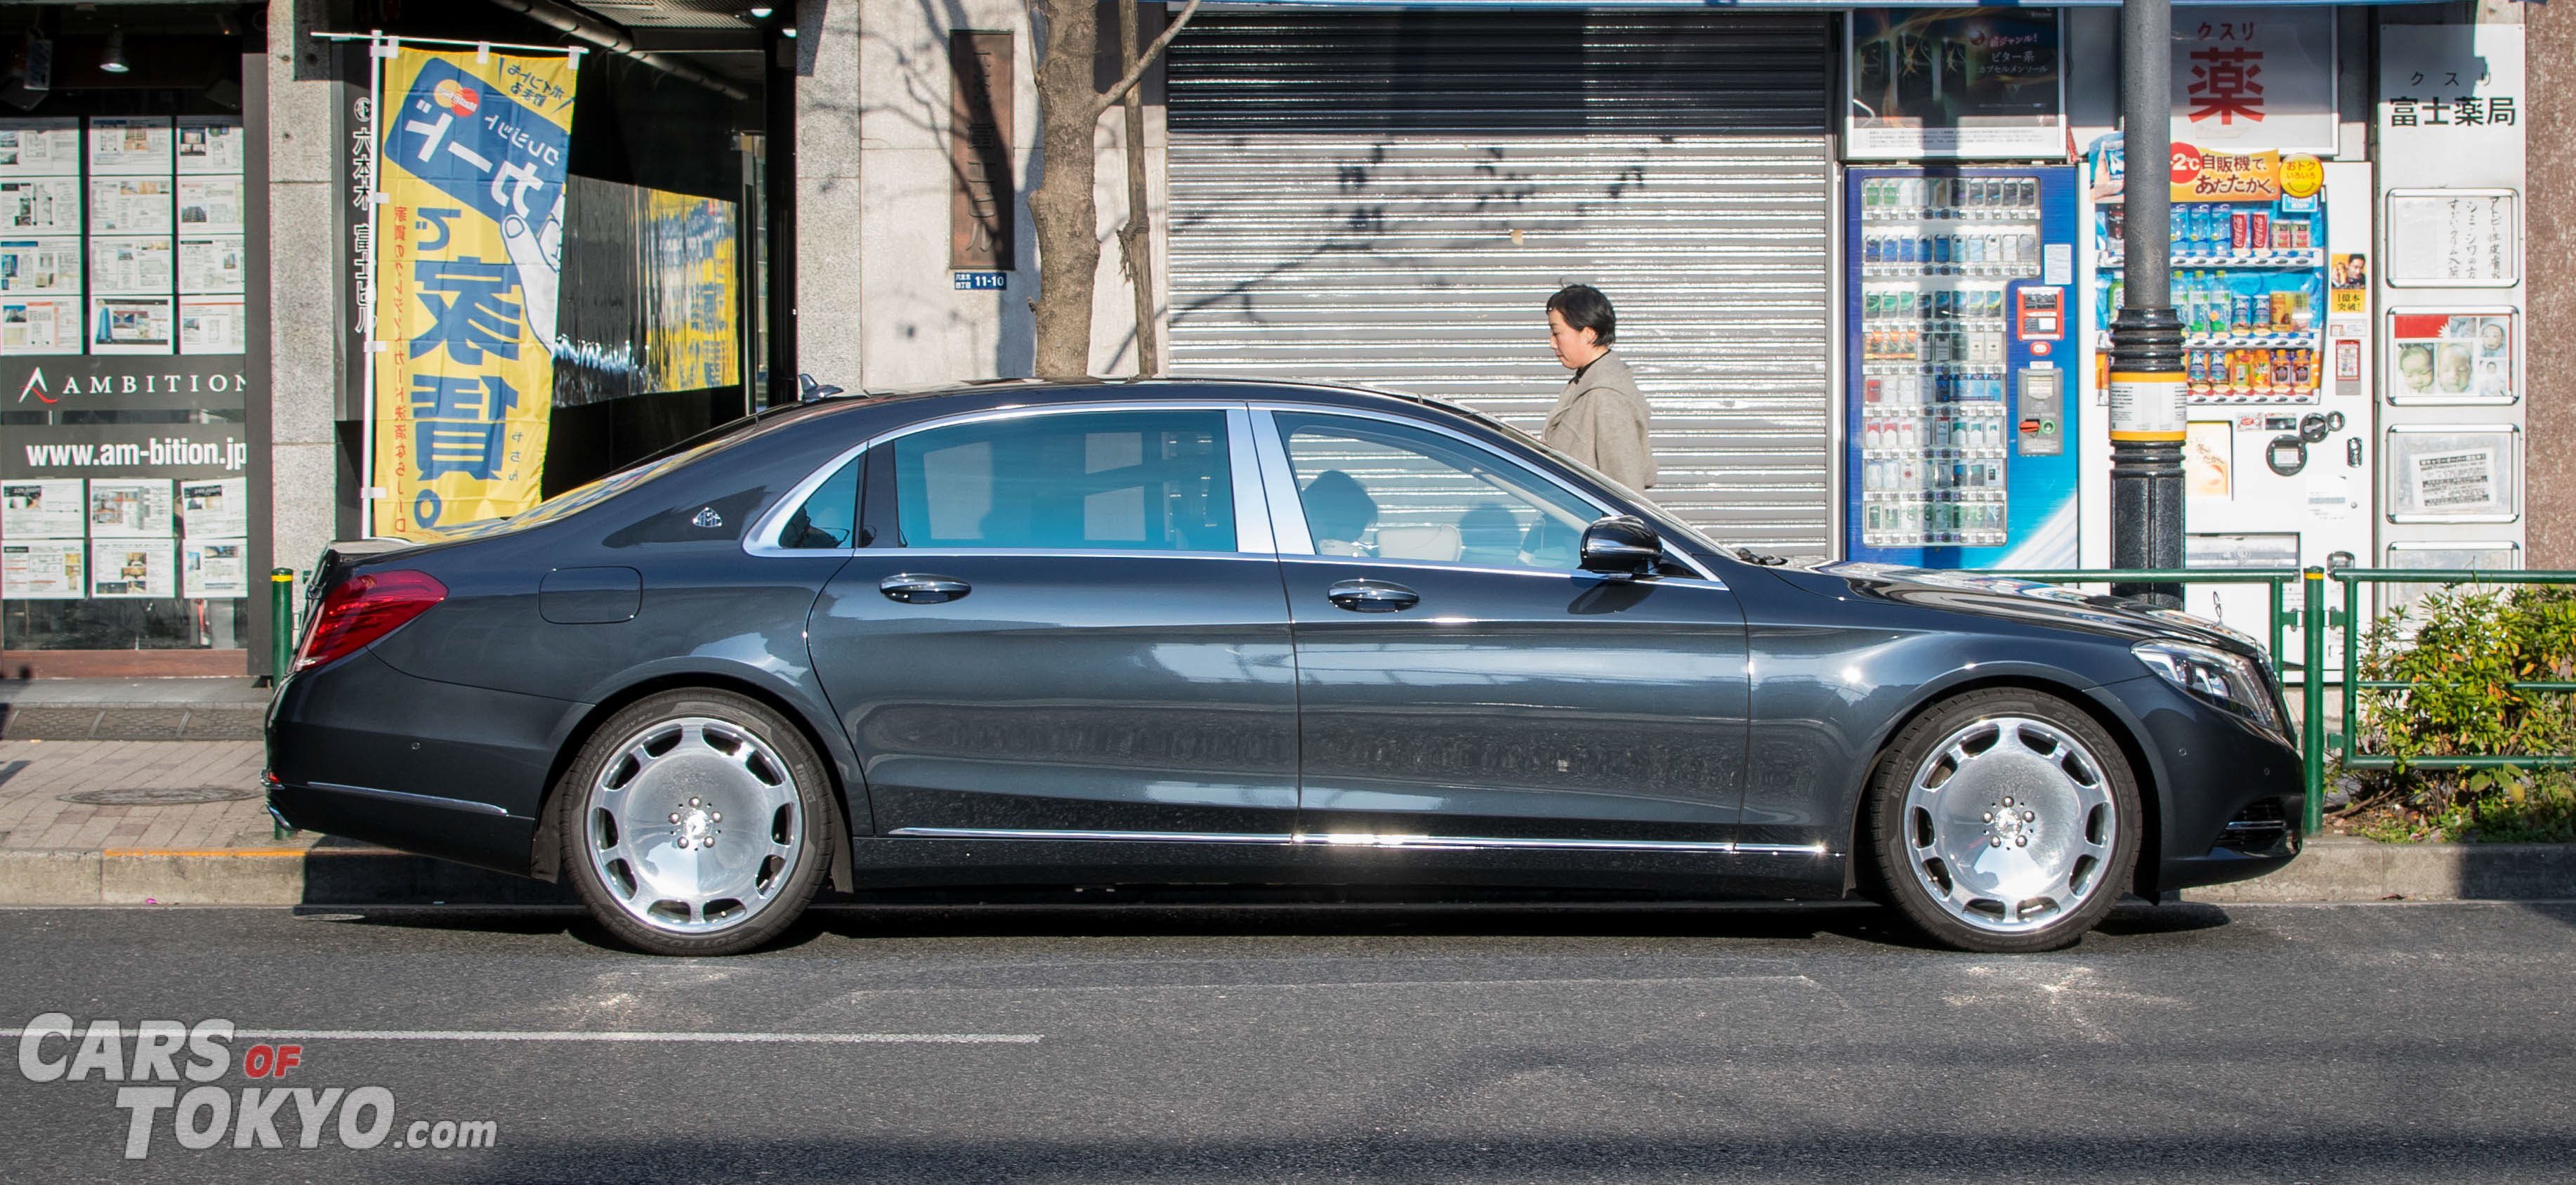 cars-of-tokyo-luxury-mercedes-benz-s-class-maybach